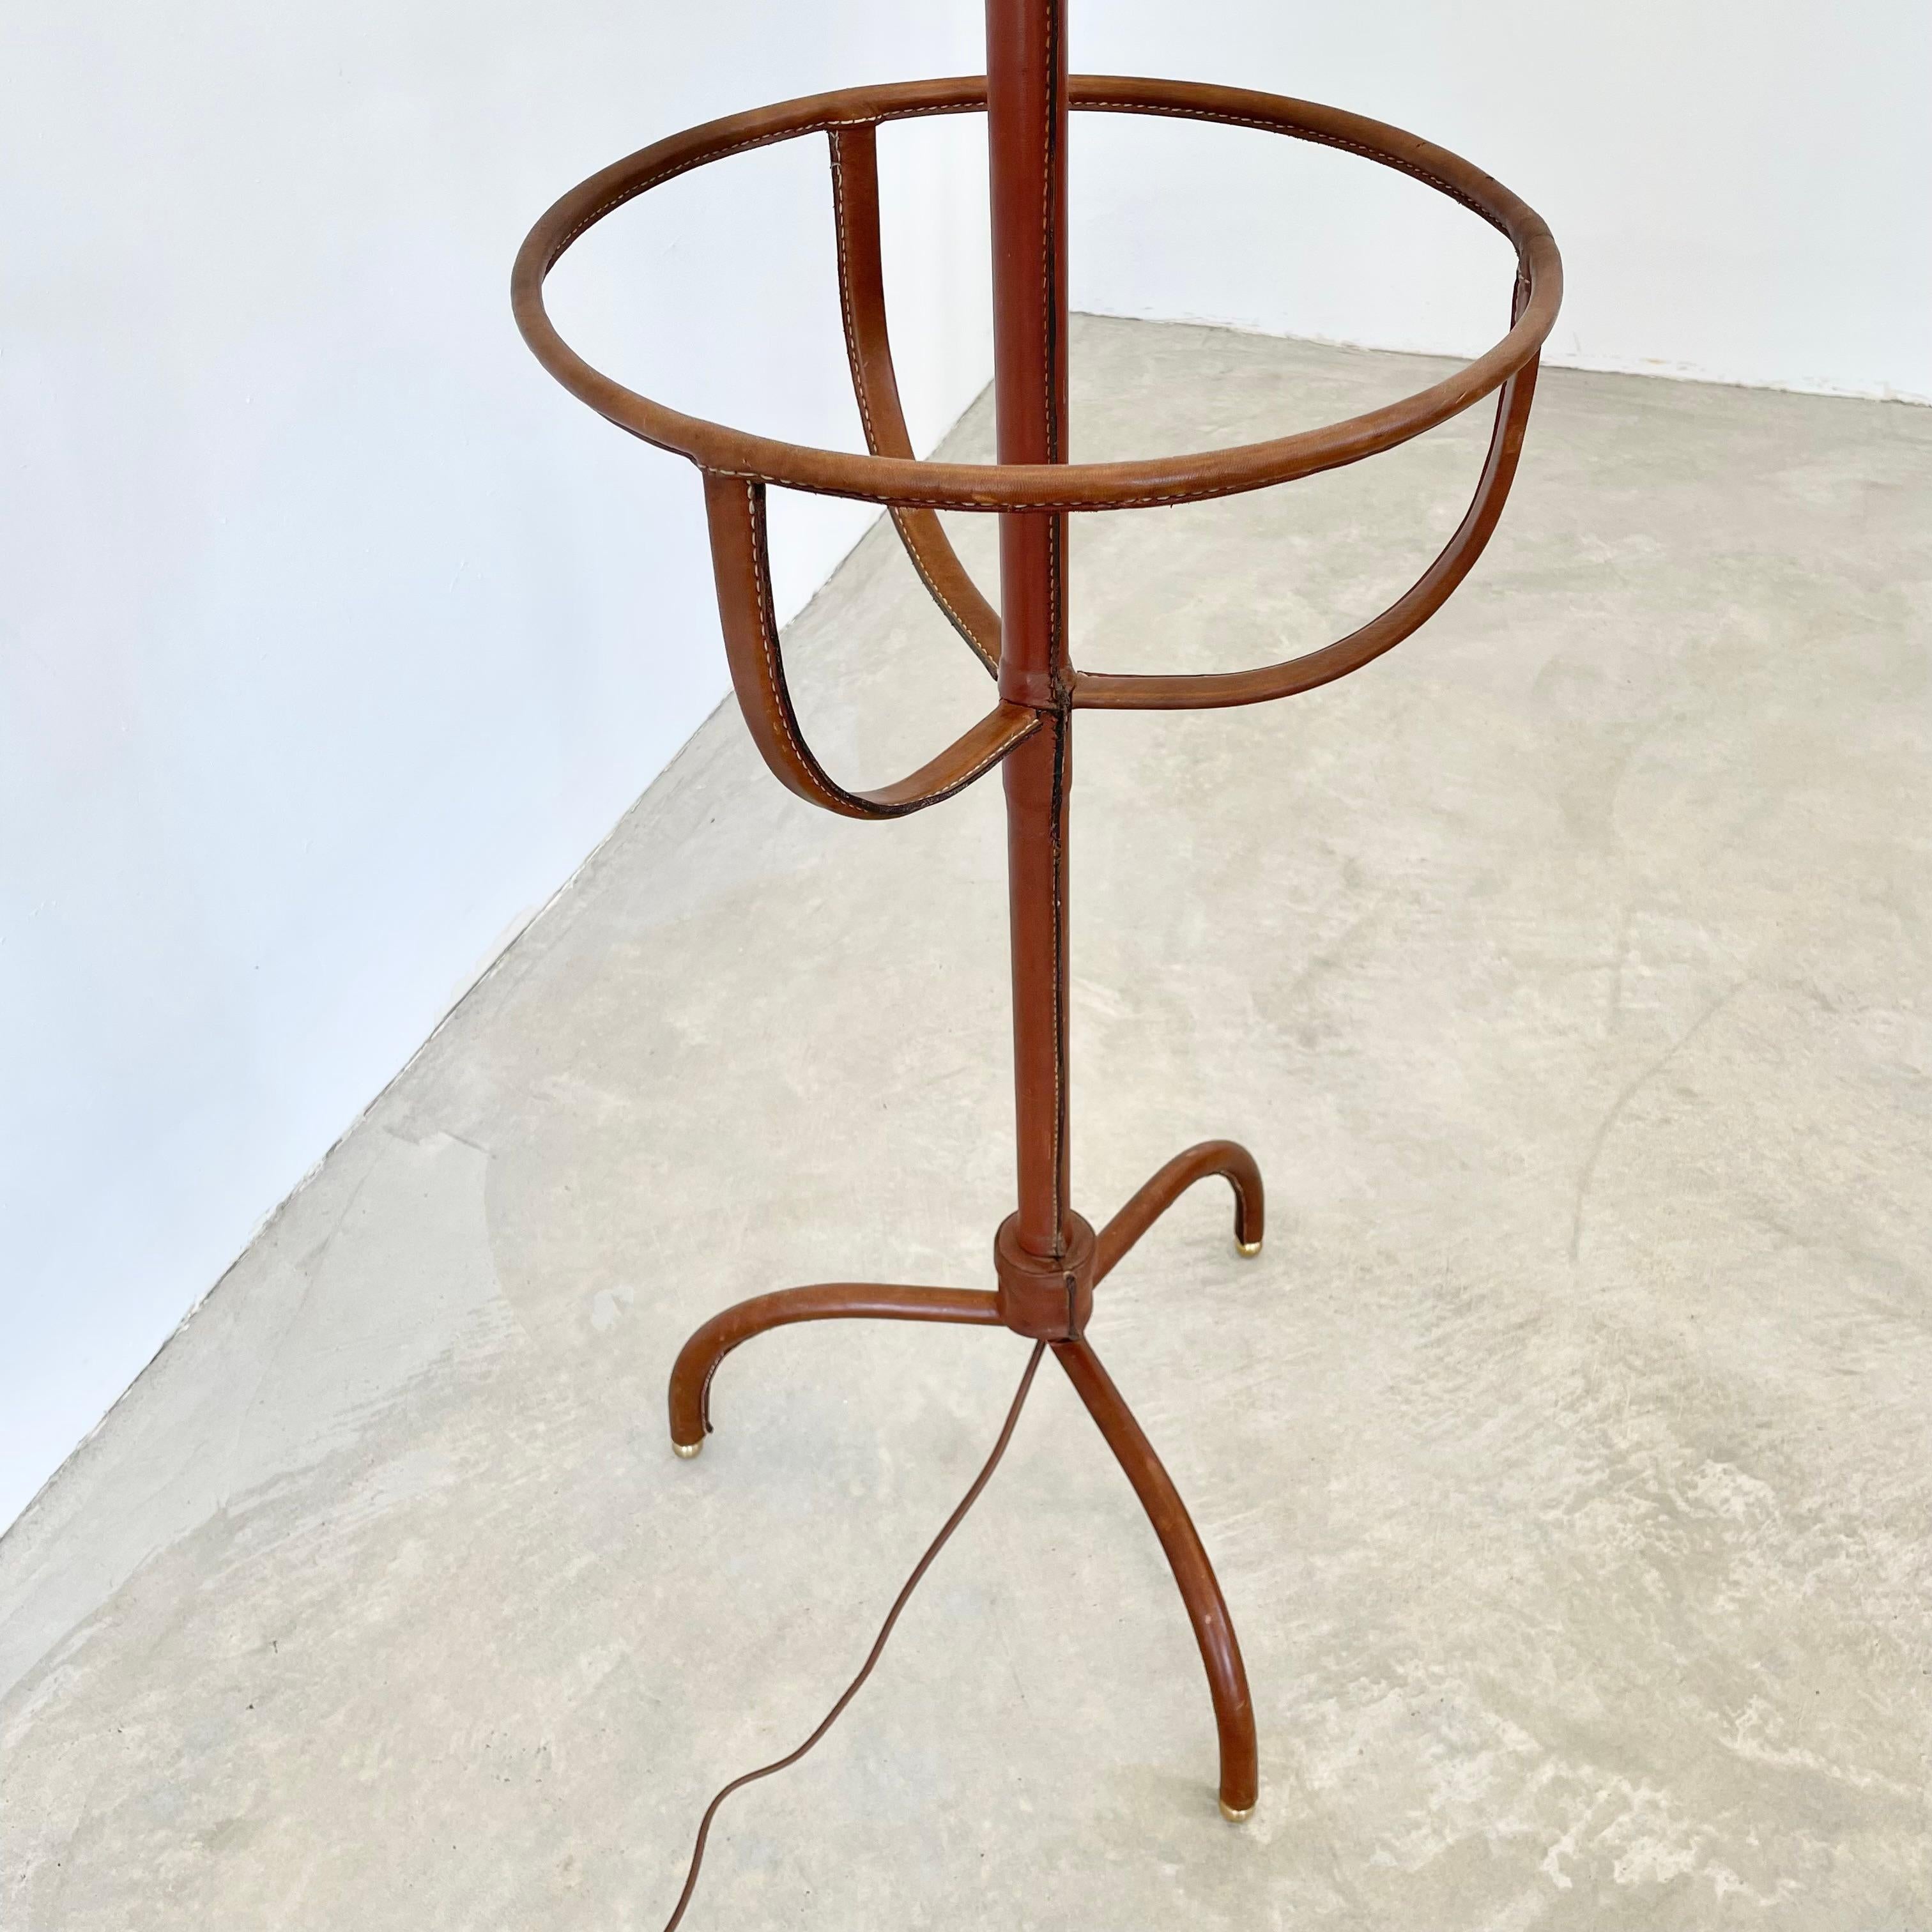 French Jacques Adnet Floor Lamp in Saddle Leather, 1950s France For Sale